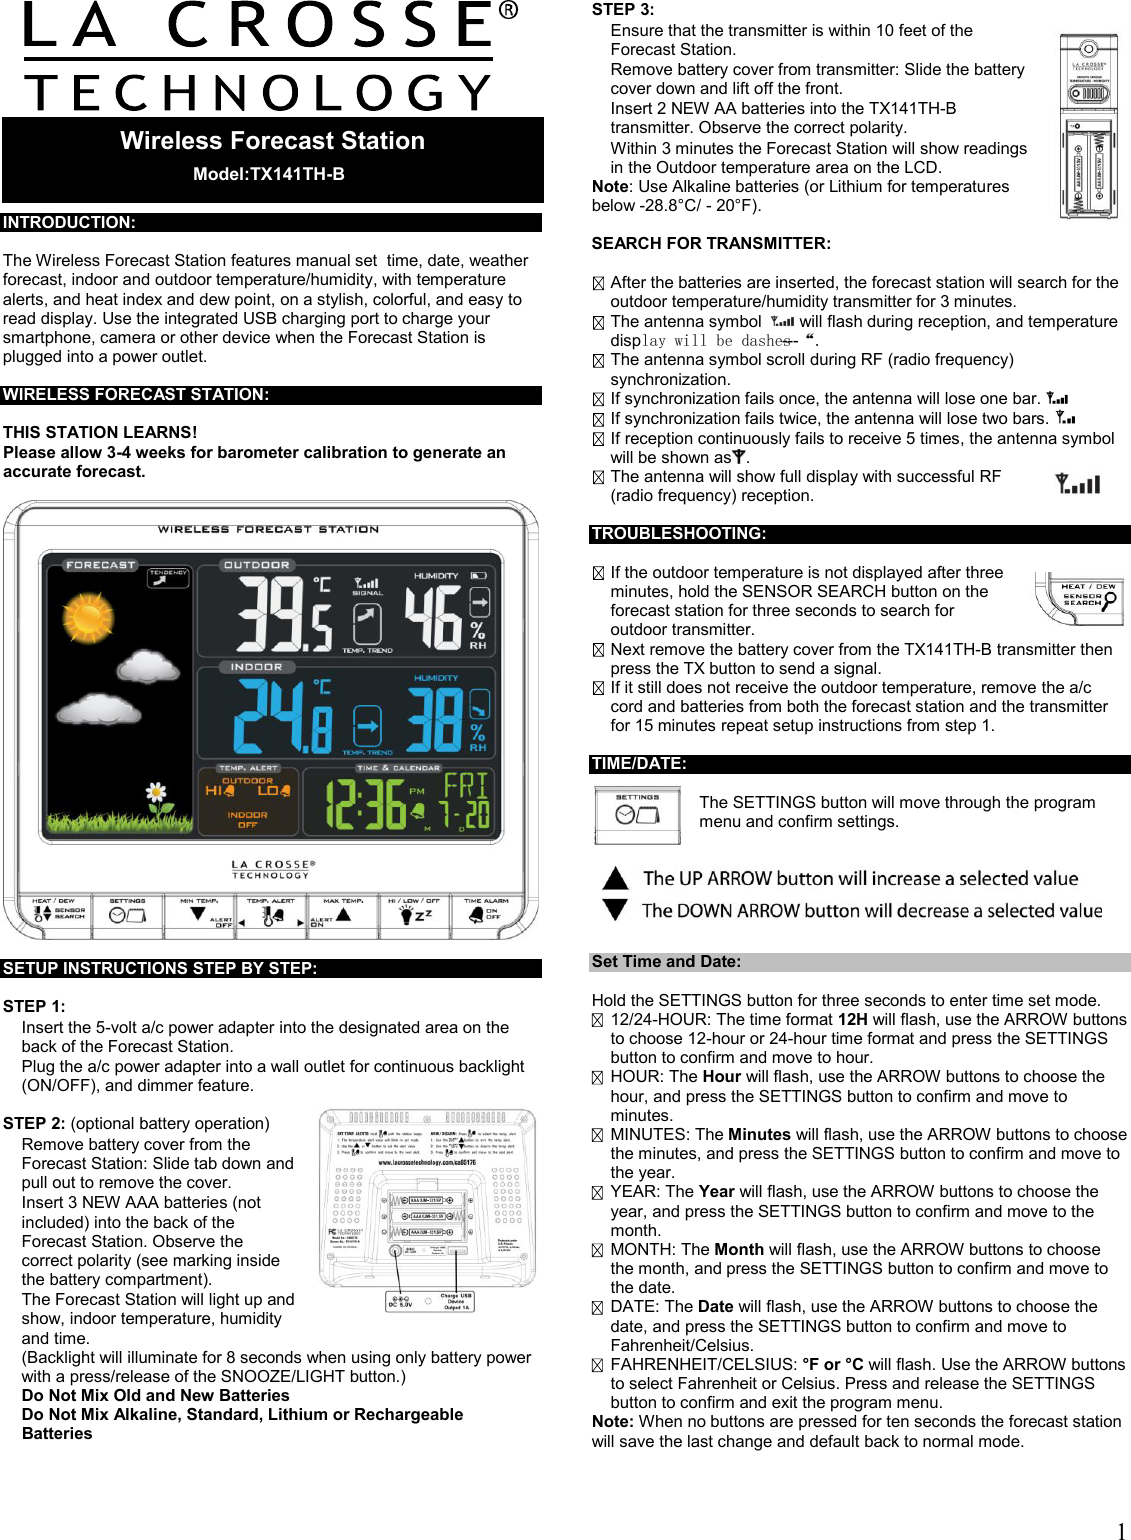  1         INTRODUCTION:  The Wireless Forecast Station features manual set  time, date, weather forecast, indoor and outdoor temperature/humidity, with temperature alerts, and heat index and dew point, on a stylish, colorful, and easy to read display. Use the integrated USB charging port to charge your smartphone, camera or other device when the Forecast Station is plugged into a power outlet.  WIRELESS FORECAST STATION:  THIS STATION LEARNS! Please allow 3-4 weeks for barometer calibration to generate an accurate forecast.    SETUP INSTRUCTIONS STEP BY STEP:   STEP 1:    Insert the 5-volt a/c power adapter into the designated area on the back of the Forecast Station.    Plug the a/c power adapter into a wall outlet for continuous backlight (ON/OFF), and dimmer feature.   STEP 2: (optional battery operation)   Remove battery cover from the Forecast Station: Slide tab down and pull out to remove the cover.    Insert 3 NEW AAA batteries (not included) into the back of the Forecast Station. Observe the correct polarity (see marking inside the battery compartment).   The Forecast Station will light up and show, indoor temperature, humidity and time.  (Backlight will illuminate for 8 seconds when using only battery power with a press/release of the SNOOZE/LIGHT button.)  Do Not Mix Old and New Batteries  Do Not Mix Alkaline, Standard, Lithium or Rechargeable Batteries   STEP 3:   Ensure that the transmitter is within 10 feet of the Forecast Station.   Remove battery cover from transmitter: Slide the battery cover down and lift off the front.   Insert 2 NEW AA batteries into the TX141TH-B transmitter. Observe the correct polarity.   Within 3 minutes the Forecast Station will show readings in the Outdoor temperature area on the LCD. Note: Use Alkaline batteries (or Lithium for temperatures below -28.8°C/ - 20°F).  SEARCH FOR TRANSMITTER:   After the batteries are inserted, the forecast station will search for the outdoor temperature/humidity transmitter for 3 minutes.  The antenna symbol    will flash during reception, and temperature display will be dashes “---“.  The antenna symbol scroll during RF (radio frequency) synchronization.  If synchronization fails once, the antenna will lose one bar.    If synchronization fails twice, the antenna will lose two bars.    If reception continuously fails to receive 5 times, the antenna symbol will be shown as .   The antenna will show full display with successful RF (radio frequency) reception.   TROUBLESHOOTING:   If the outdoor temperature is not displayed after three minutes, hold the SENSOR SEARCH button on the forecast station for three seconds to search for outdoor transmitter.   Next remove the battery cover from the TX141TH-B transmitter then press the TX button to send a signal.  If it still does not receive the outdoor temperature, remove the a/c cord and batteries from both the forecast station and the transmitter for 15 minutes repeat setup instructions from step 1.                                         TIME/DATE:   The SETTINGS button will move through the program menu and confirm settings.    Set Time and Date:  Hold the SETTINGS button for three seconds to enter time set mode.  12/24-HOUR: The time format 12H will flash, use the ARROW buttons to choose 12-hour or 24-hour time format and press the SETTINGS button to confirm and move to hour.  HOUR: The Hour will flash, use the ARROW buttons to choose the hour, and press the SETTINGS button to confirm and move to minutes.  MINUTES: The Minutes will flash, use the ARROW buttons to choose the minutes, and press the SETTINGS button to confirm and move to the year.  YEAR: The Year will flash, use the ARROW buttons to choose the year, and press the SETTINGS button to confirm and move to the month.  MONTH: The Month will flash, use the ARROW buttons to choose the month, and press the SETTINGS button to confirm and move to the date.  DATE: The Date will flash, use the ARROW buttons to choose the date, and press the SETTINGS button to confirm and move to Fahrenheit/Celsius.  FAHRENHEIT/CELSIUS: °F or °C will flash. Use the ARROW buttons to select Fahrenheit or Celsius. Press and release the SETTINGS button to confirm and exit the program menu. Note: When no buttons are pressed for ten seconds the forecast station will save the last change and default back to normal mode.   Wireless Forecast Station   Model:TX141TH-B  